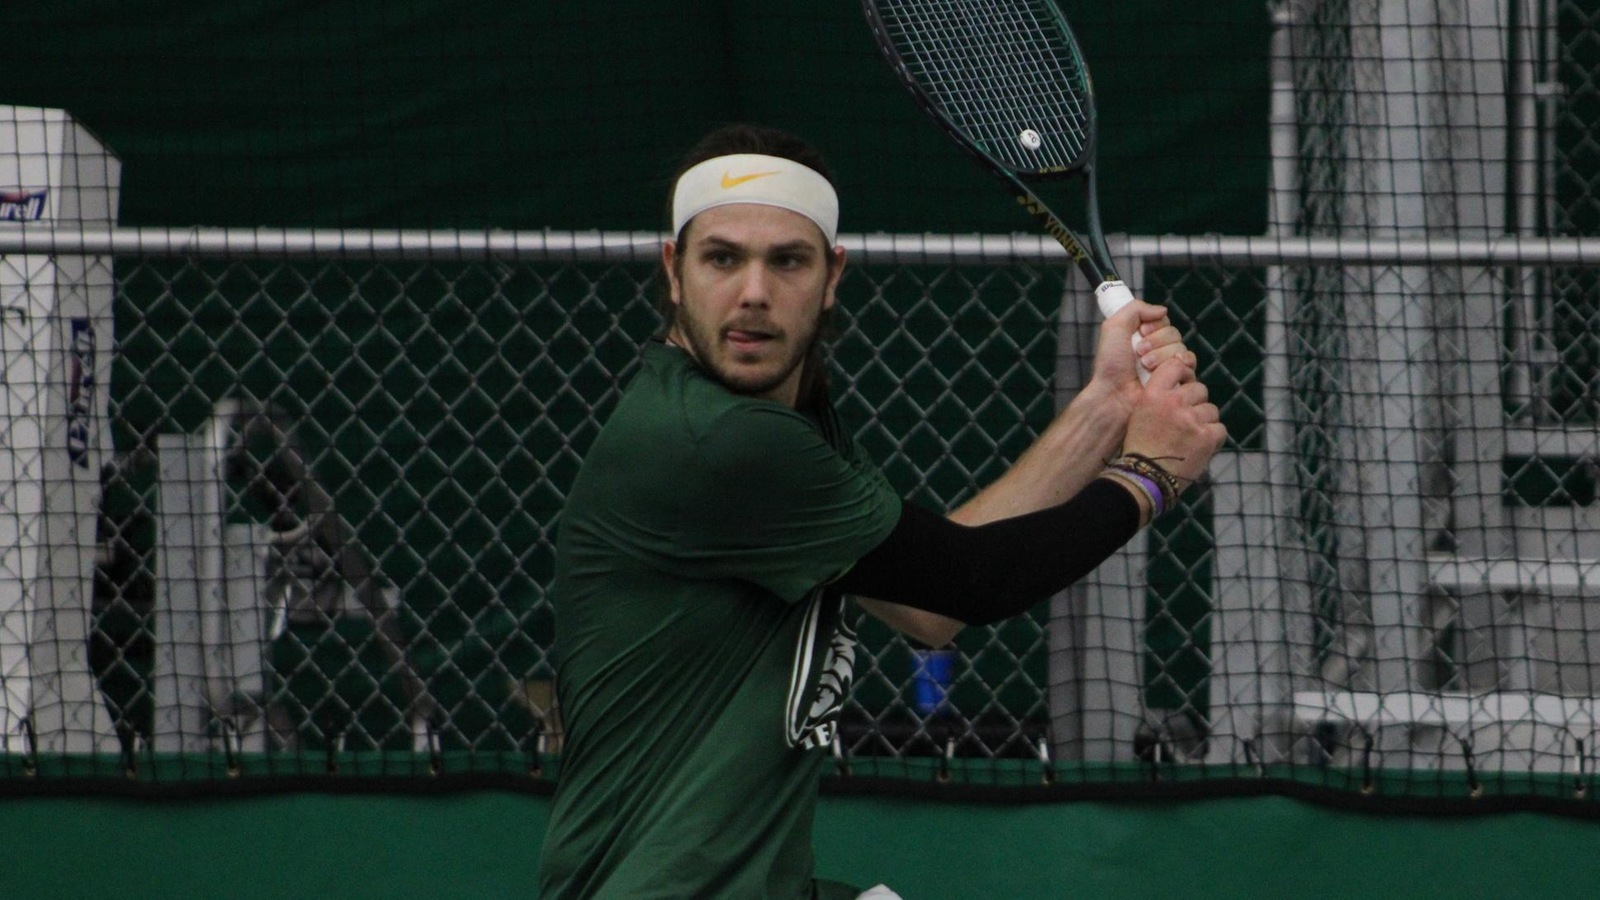 Cleveland State Men&rsquo;s Tennis Competes At ITA All-American Regional